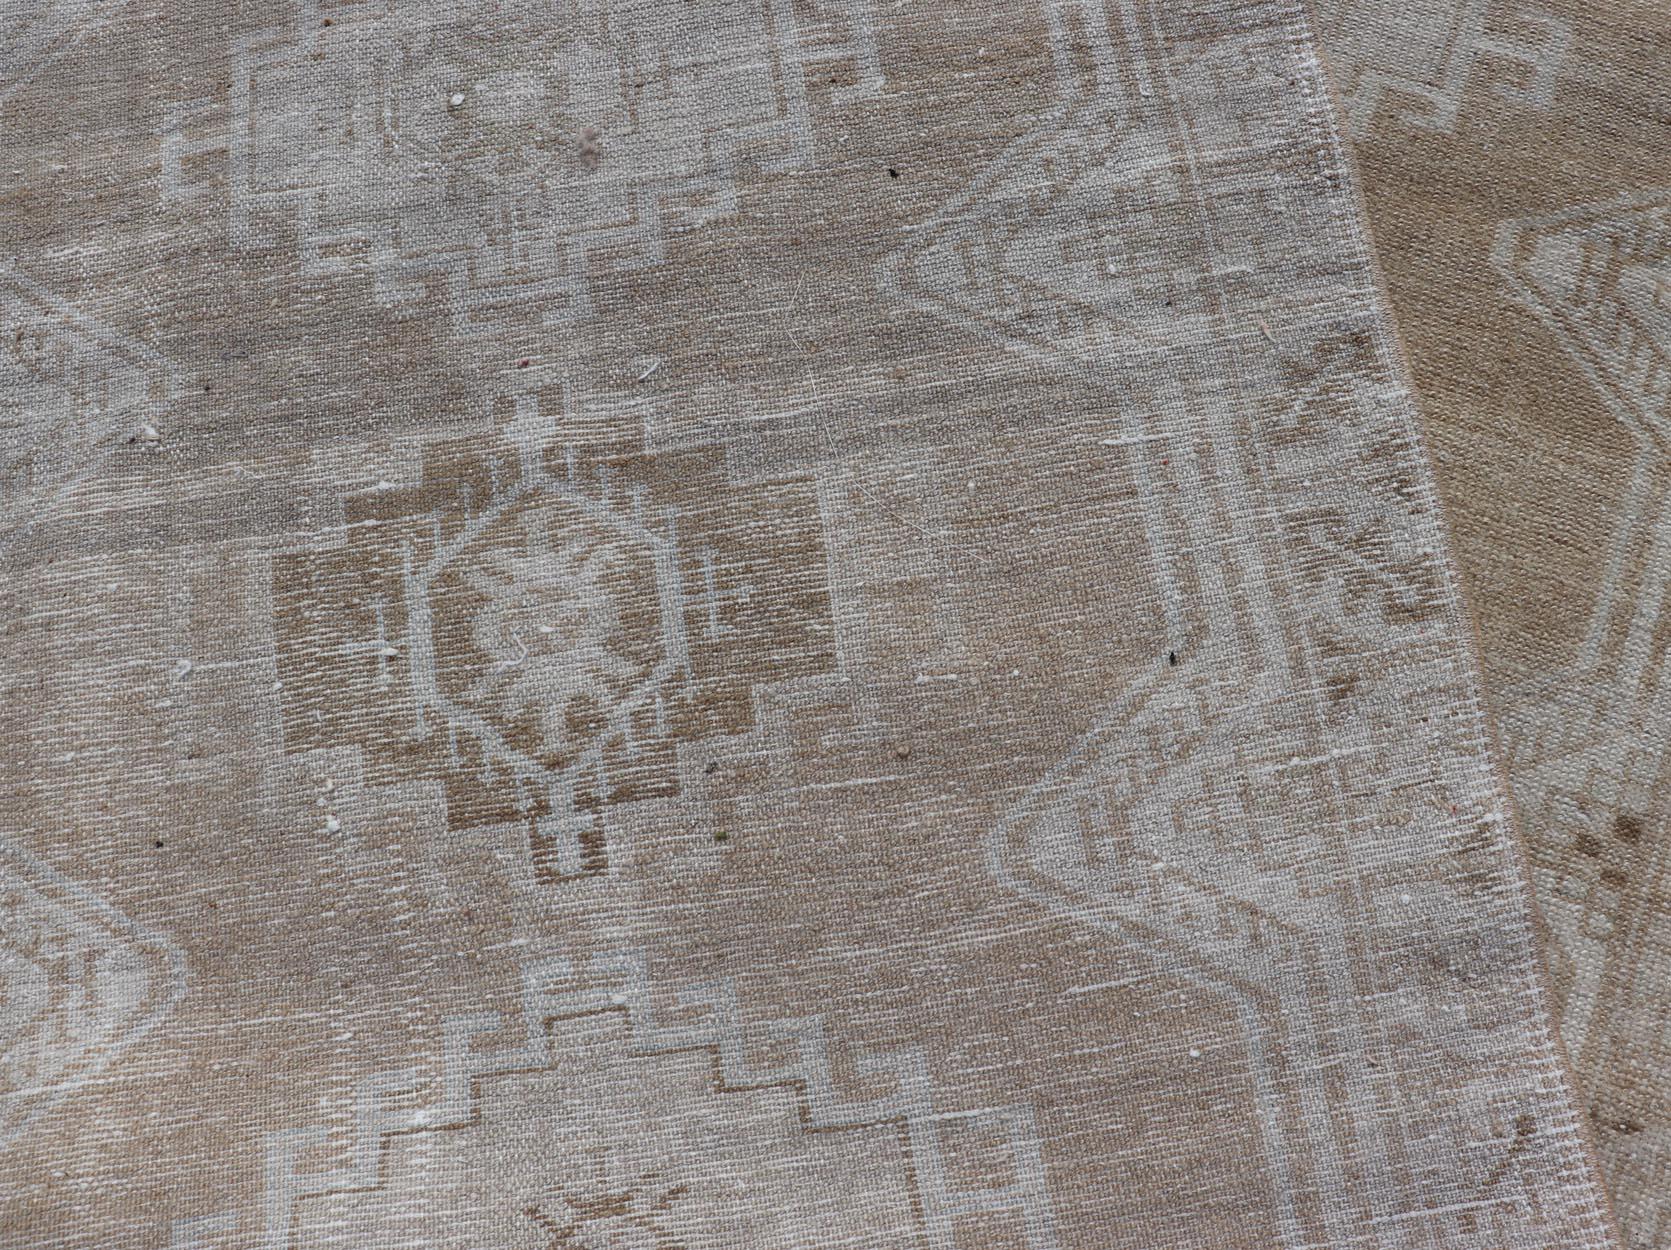 Antique Persian Malayer Runner All-Over  With Medallion Design in Earth Tones For Sale 5